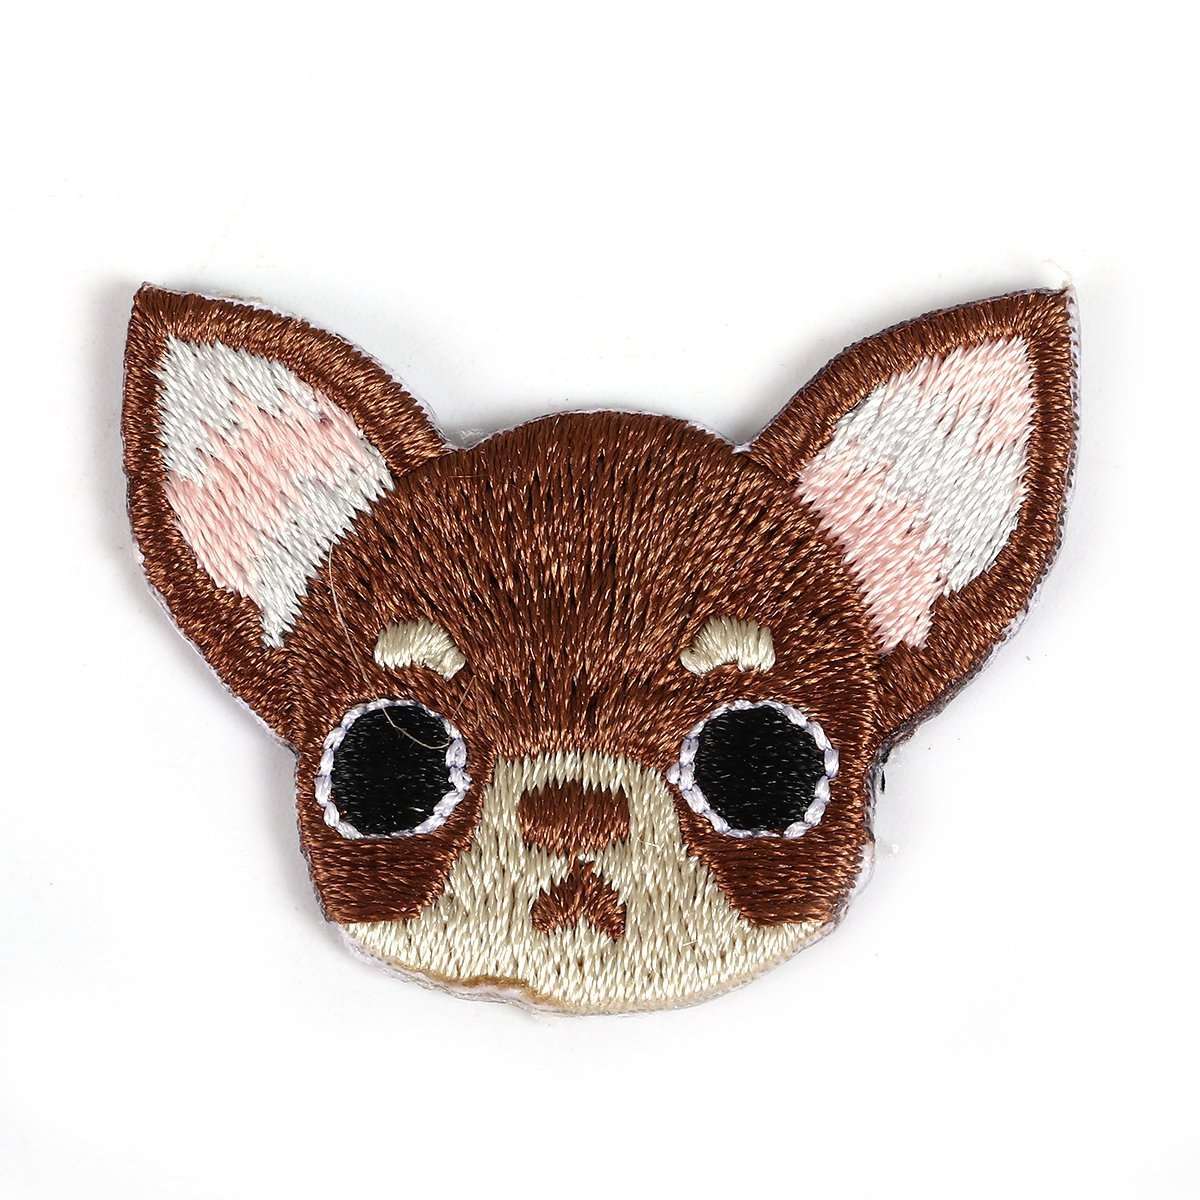 Craft Chihuahua Dog Iron On Embroidered Patch - My Custom Tee Party